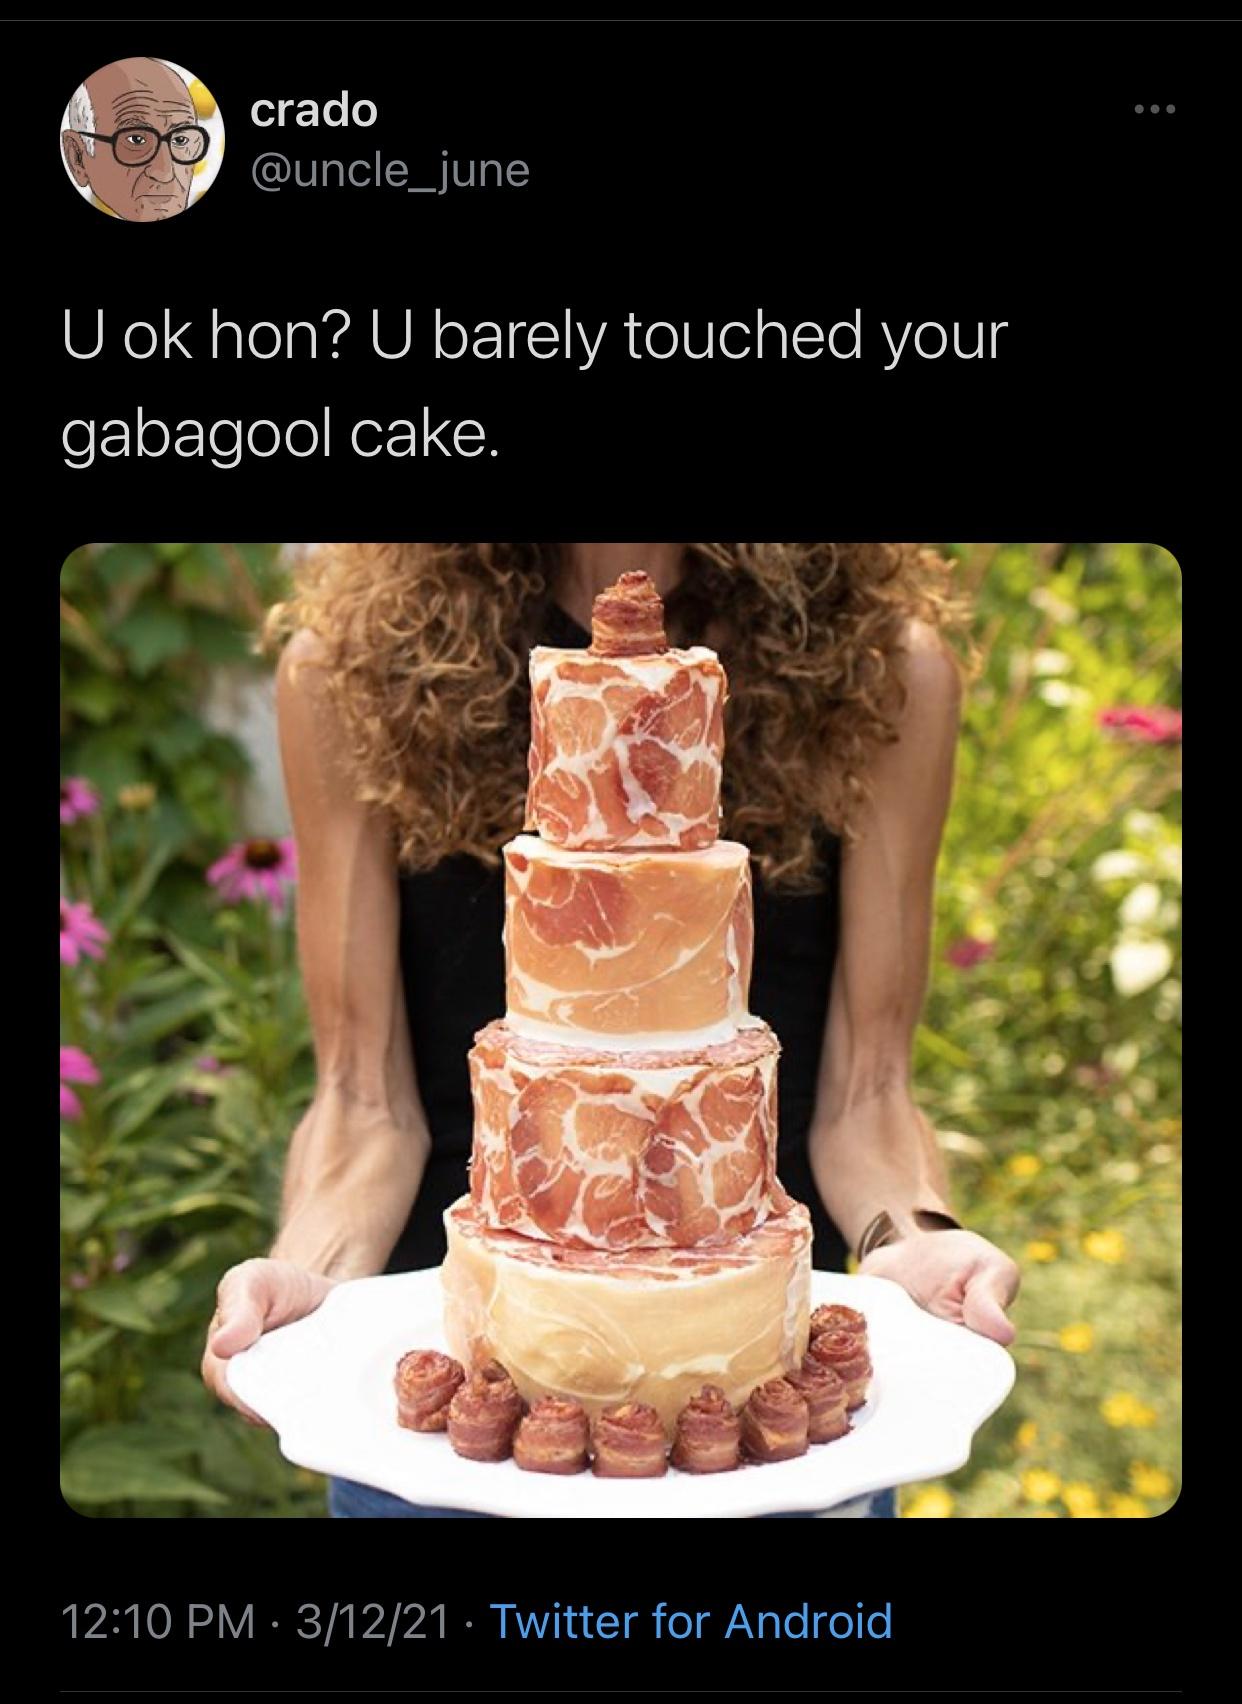 funny memes and random pics - cakes for carnivores - crado U ok hon? U barely touched your gabagool cake. 31221 Twitter for Android